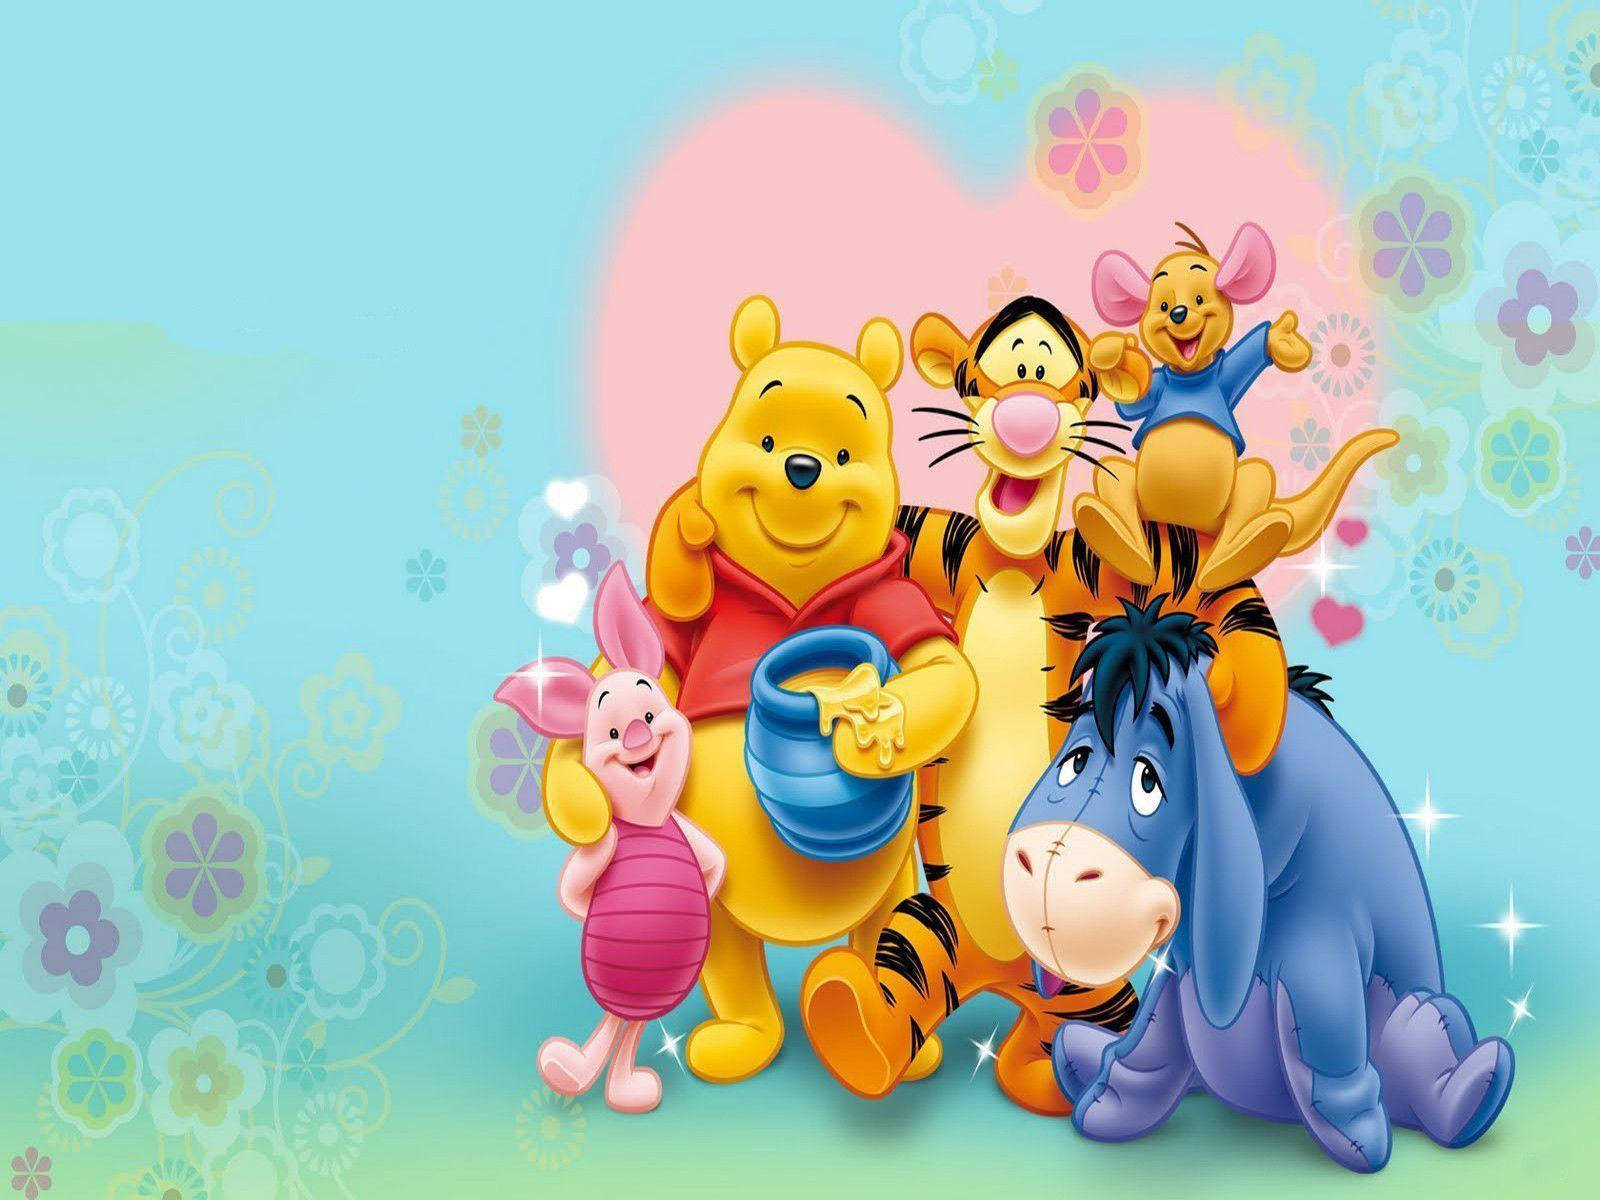 Winnie The Pooh and friends share a heartwarming moment. Wallpaper